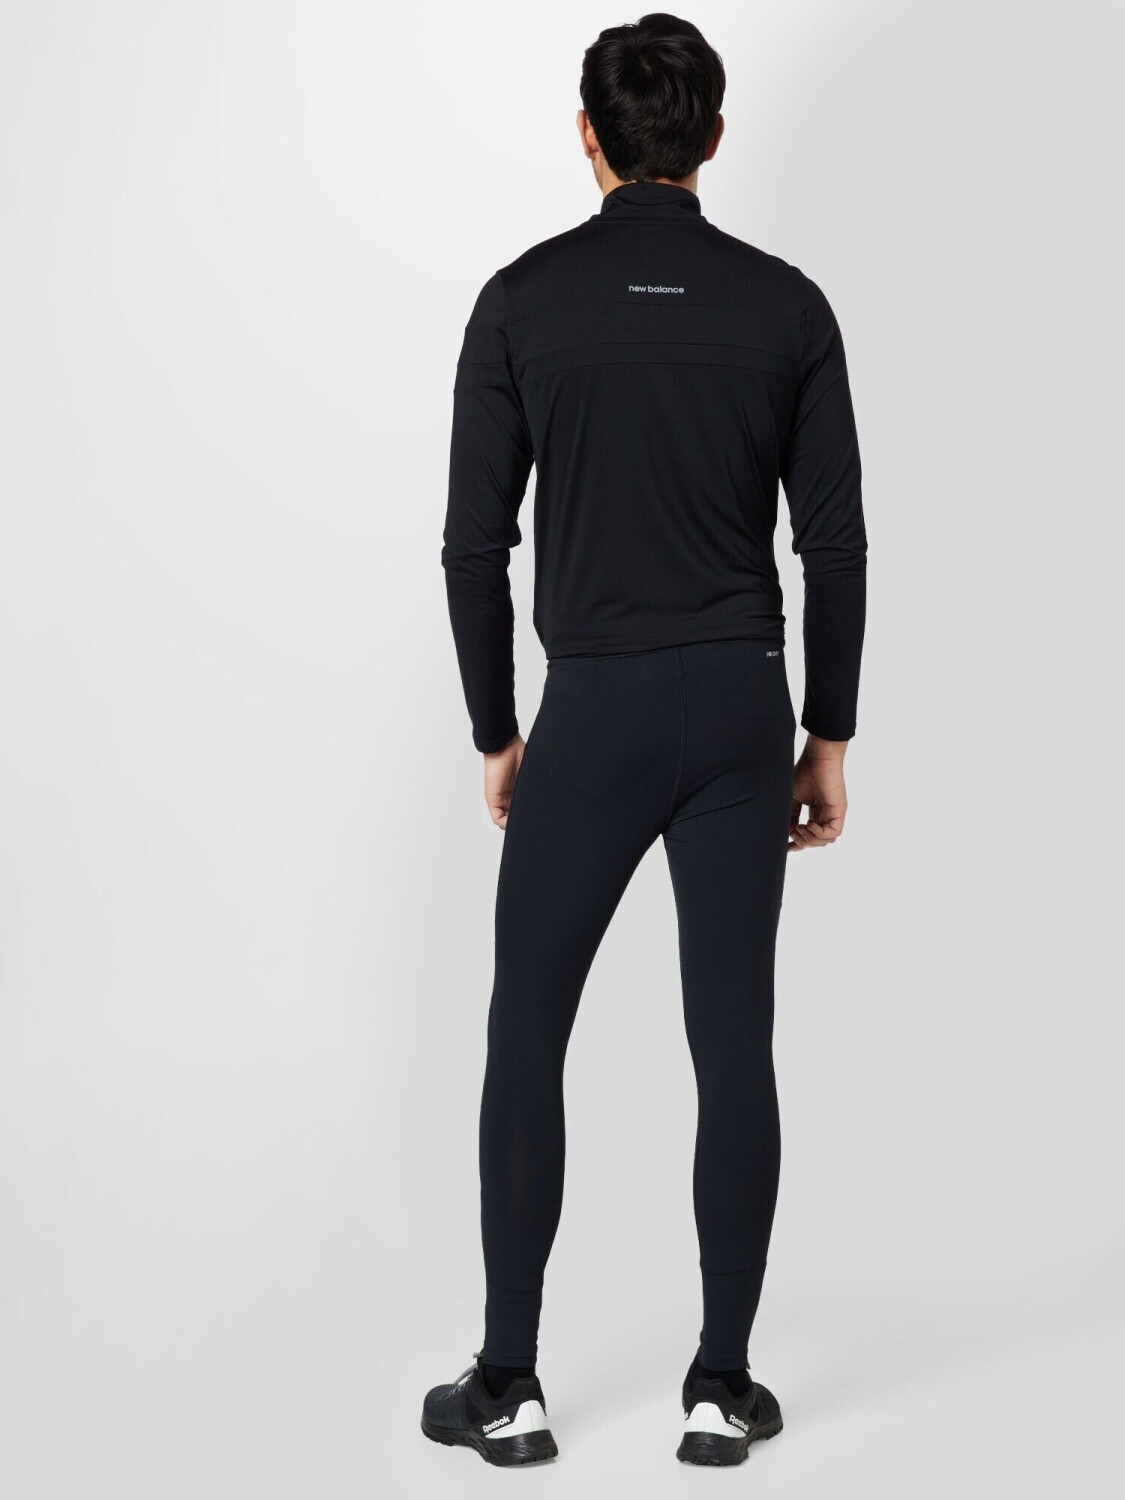 Buy New Balance Accelerate Leggings (MP23234) black from £30.99